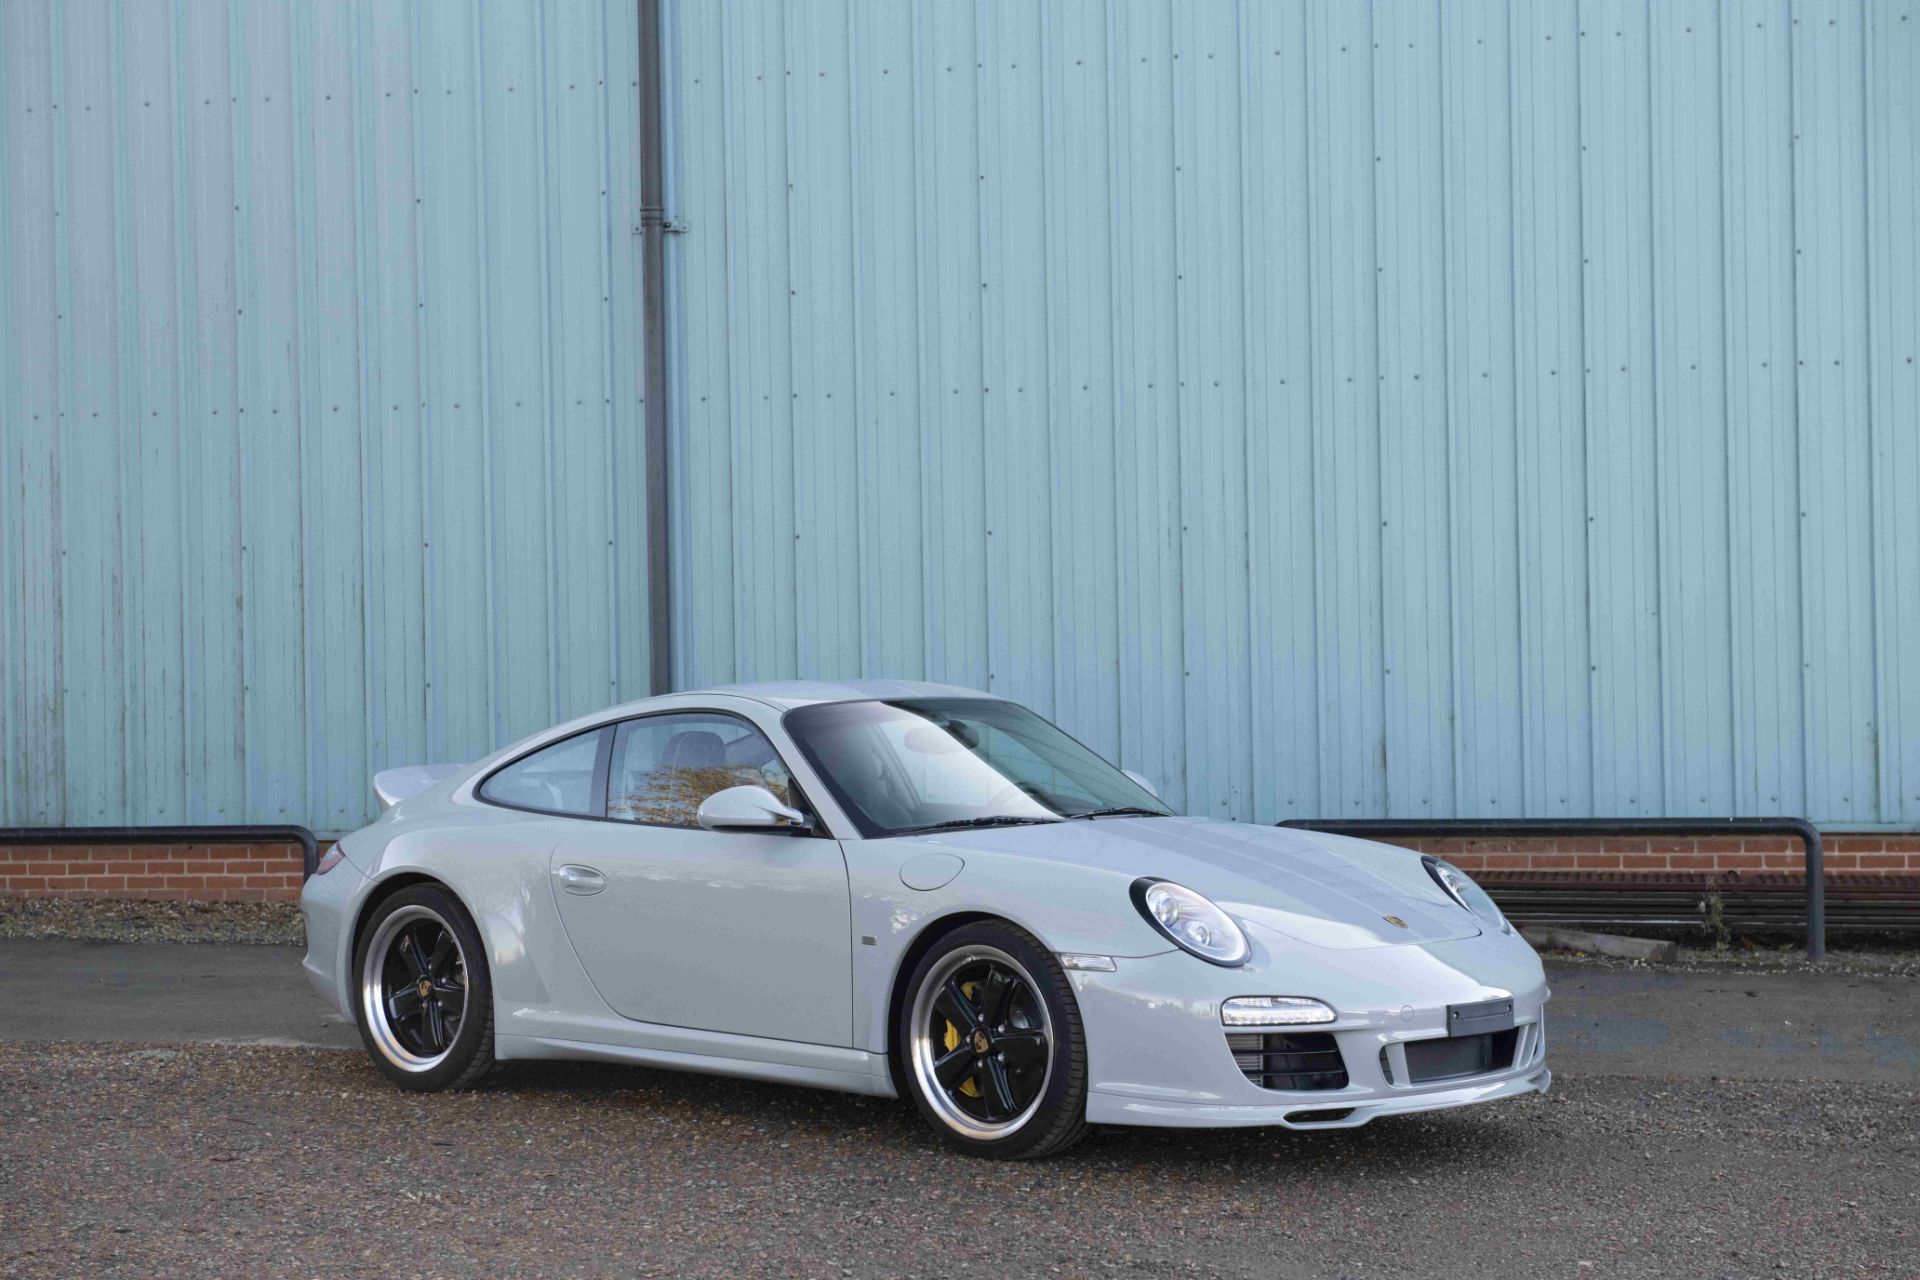 One owner from new,2010 Porsche 911 Type 997 Sport Classic Coup&#233; Chassis no. WP0ZZZ99ZAS7...